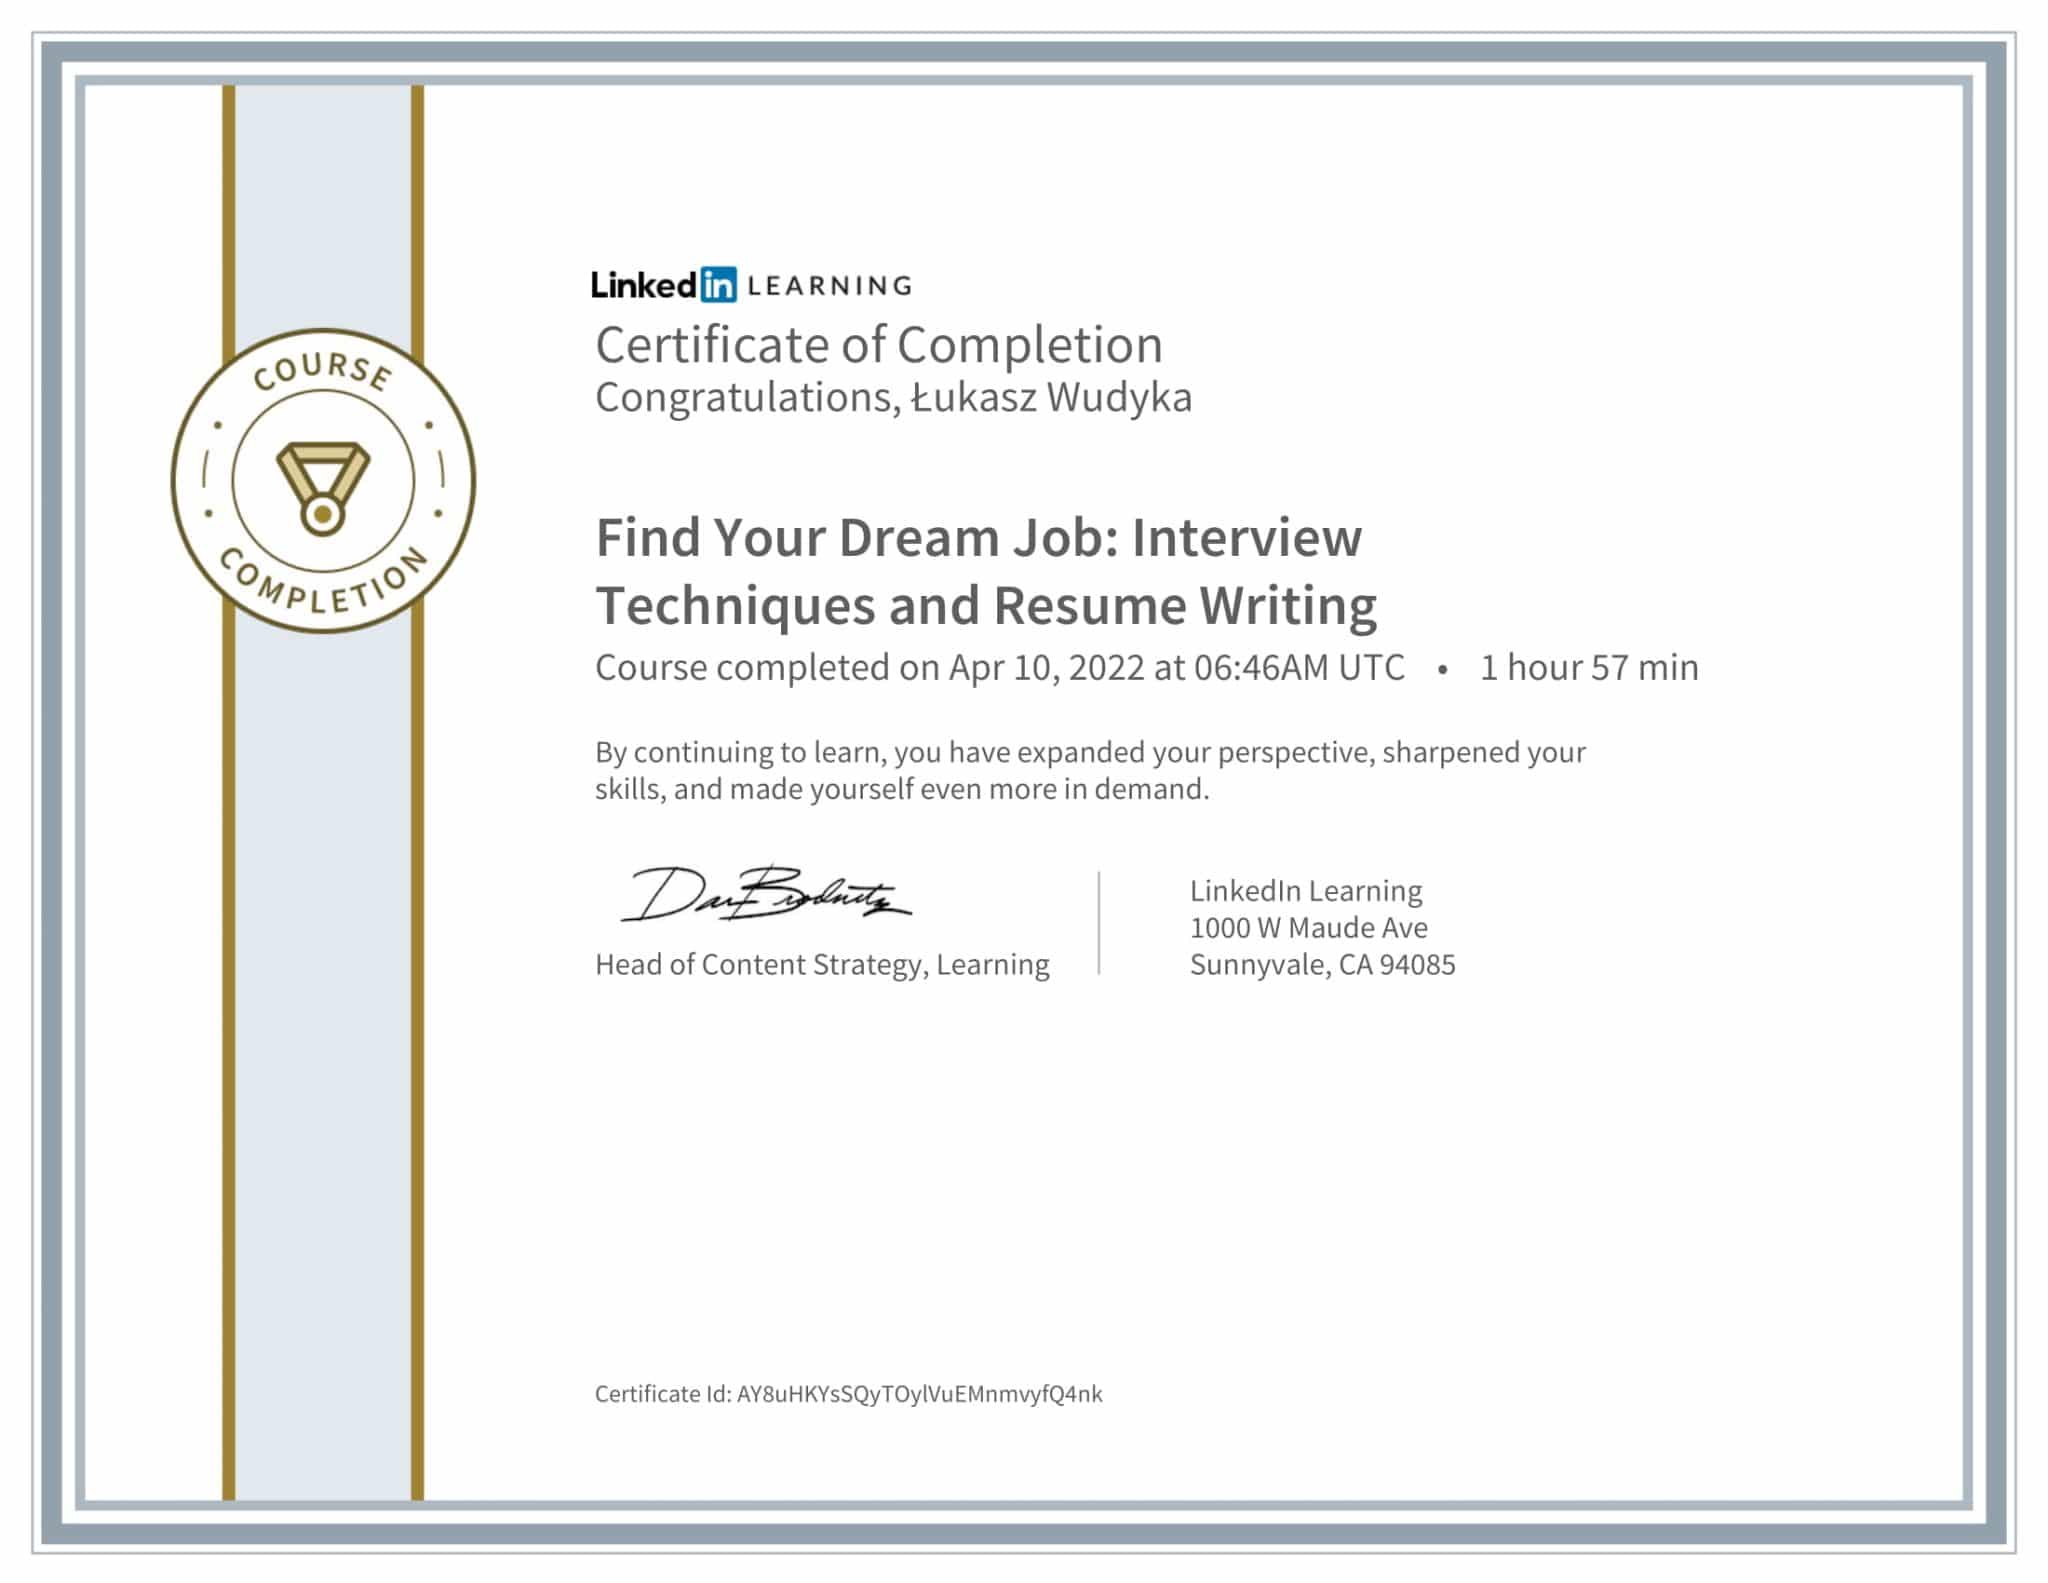 CertificateOfCompletion_Find Your Dream Job Interview Techniques and Resume Writing-1